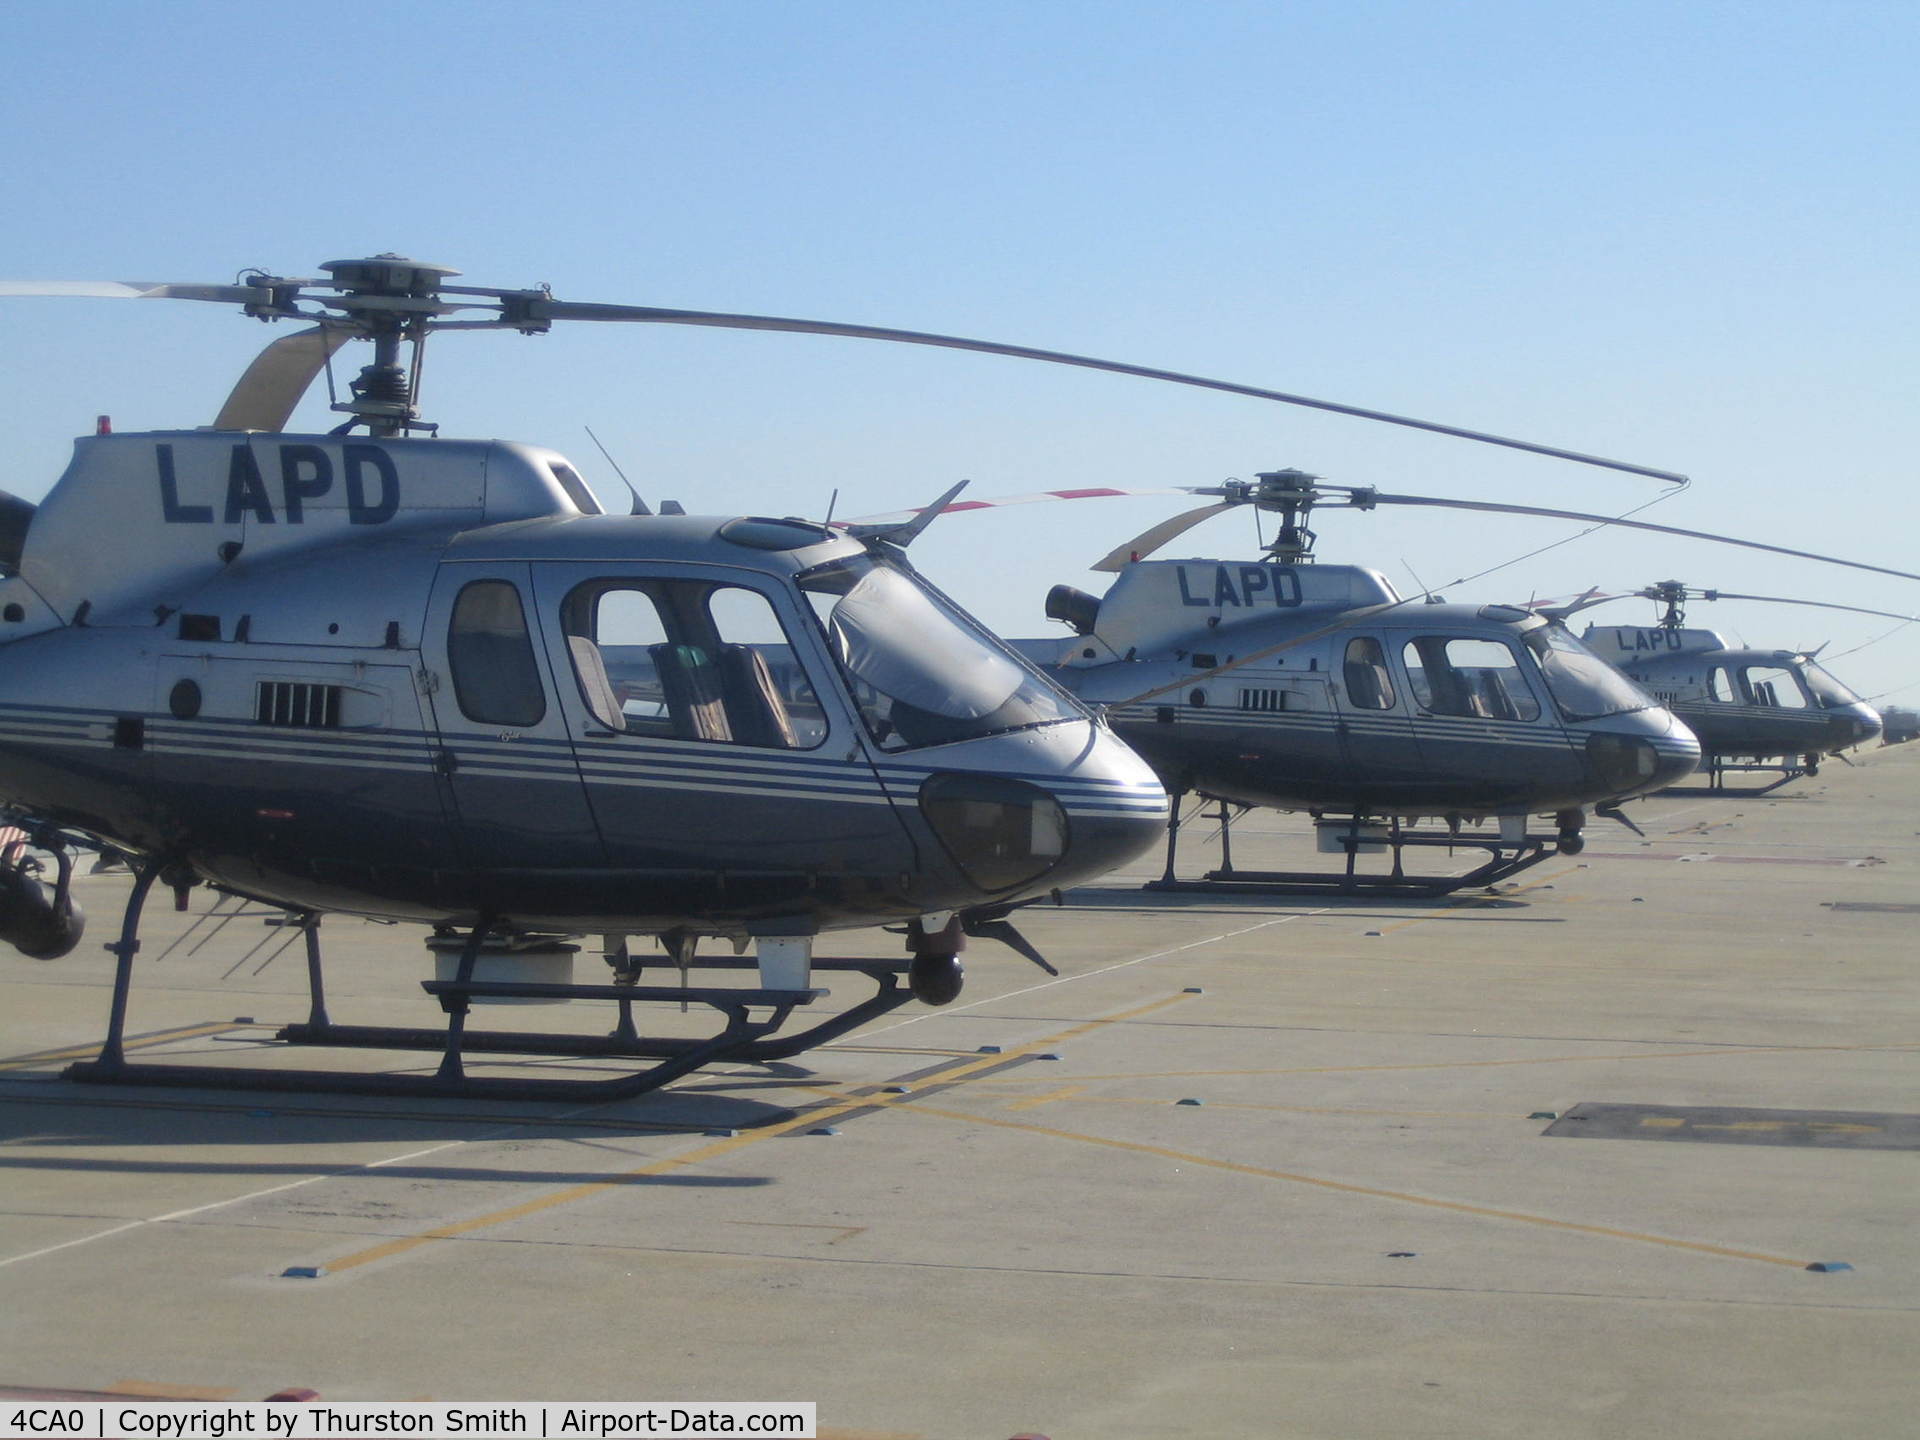 Lapd Hooper Heliport (4CA0) - 3 choppers on pad